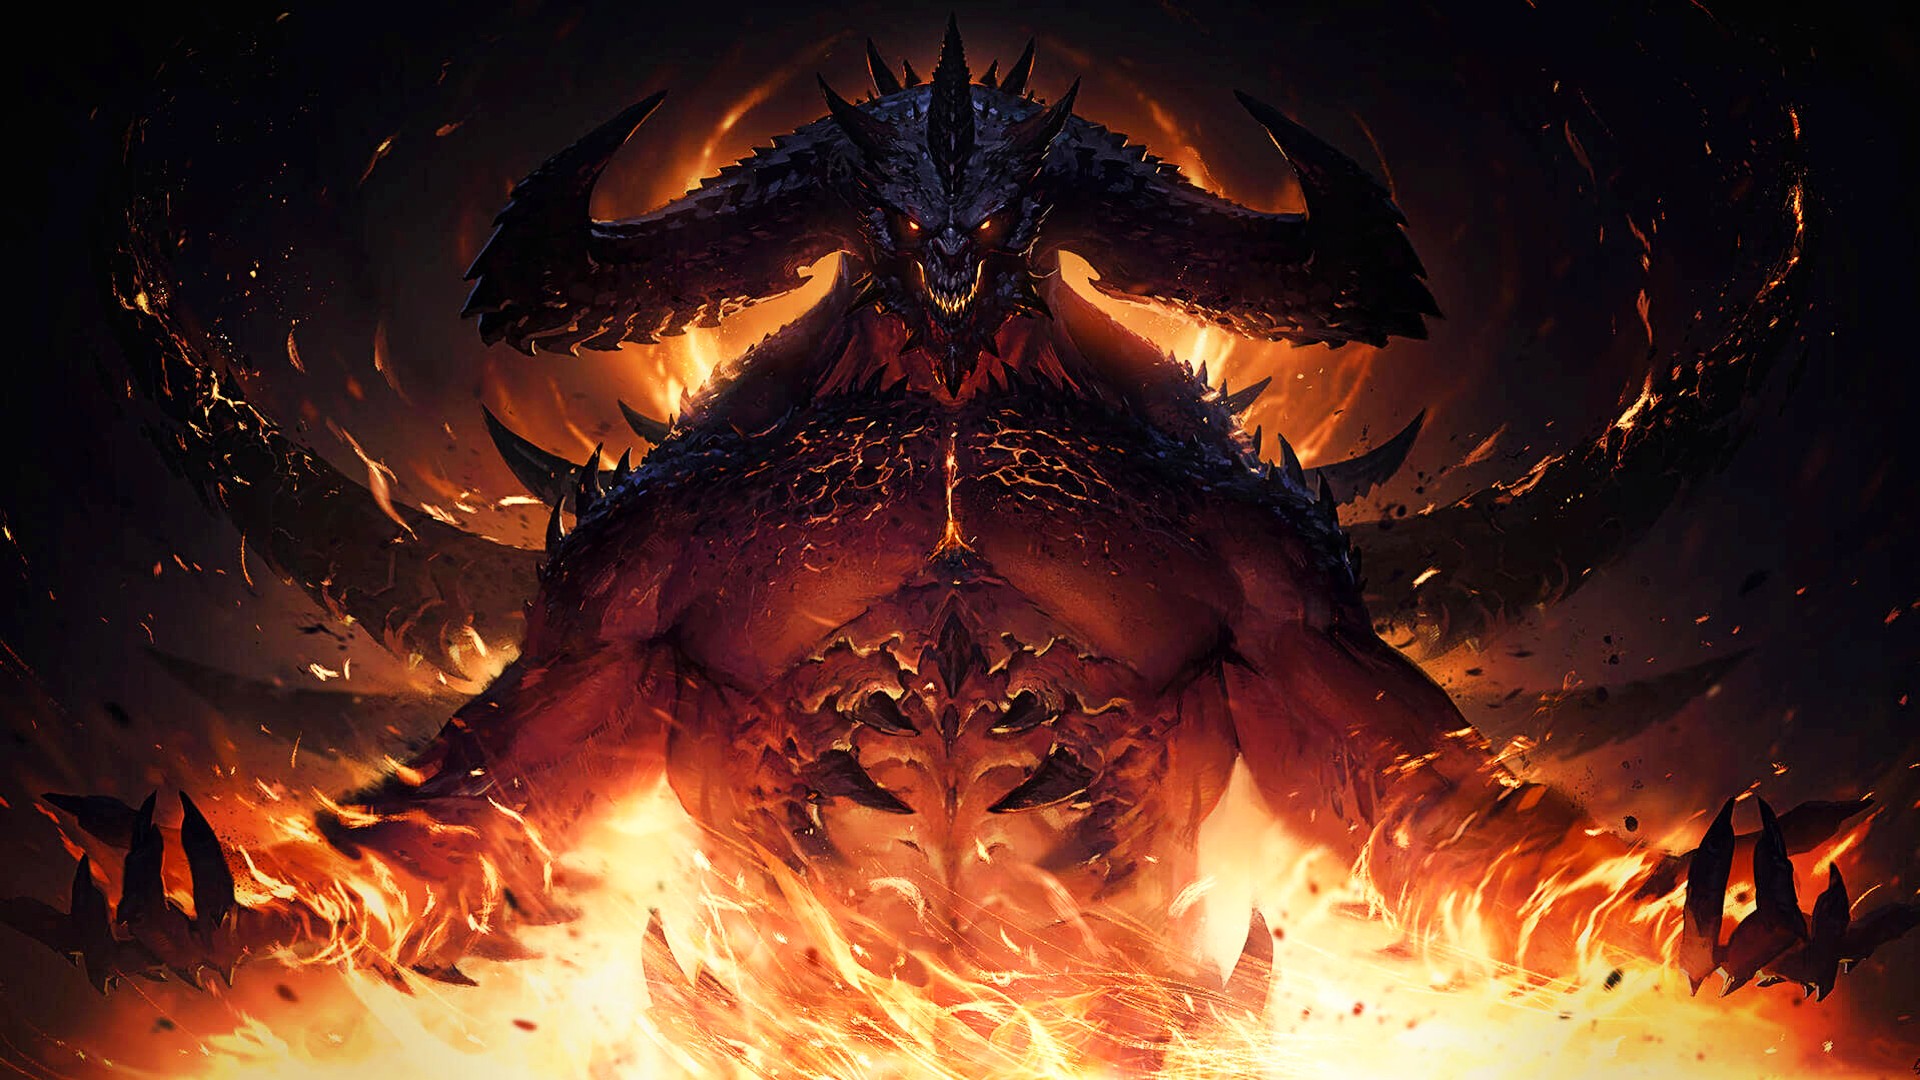 Diablo Immortal's antagonist stands in a pit of fire